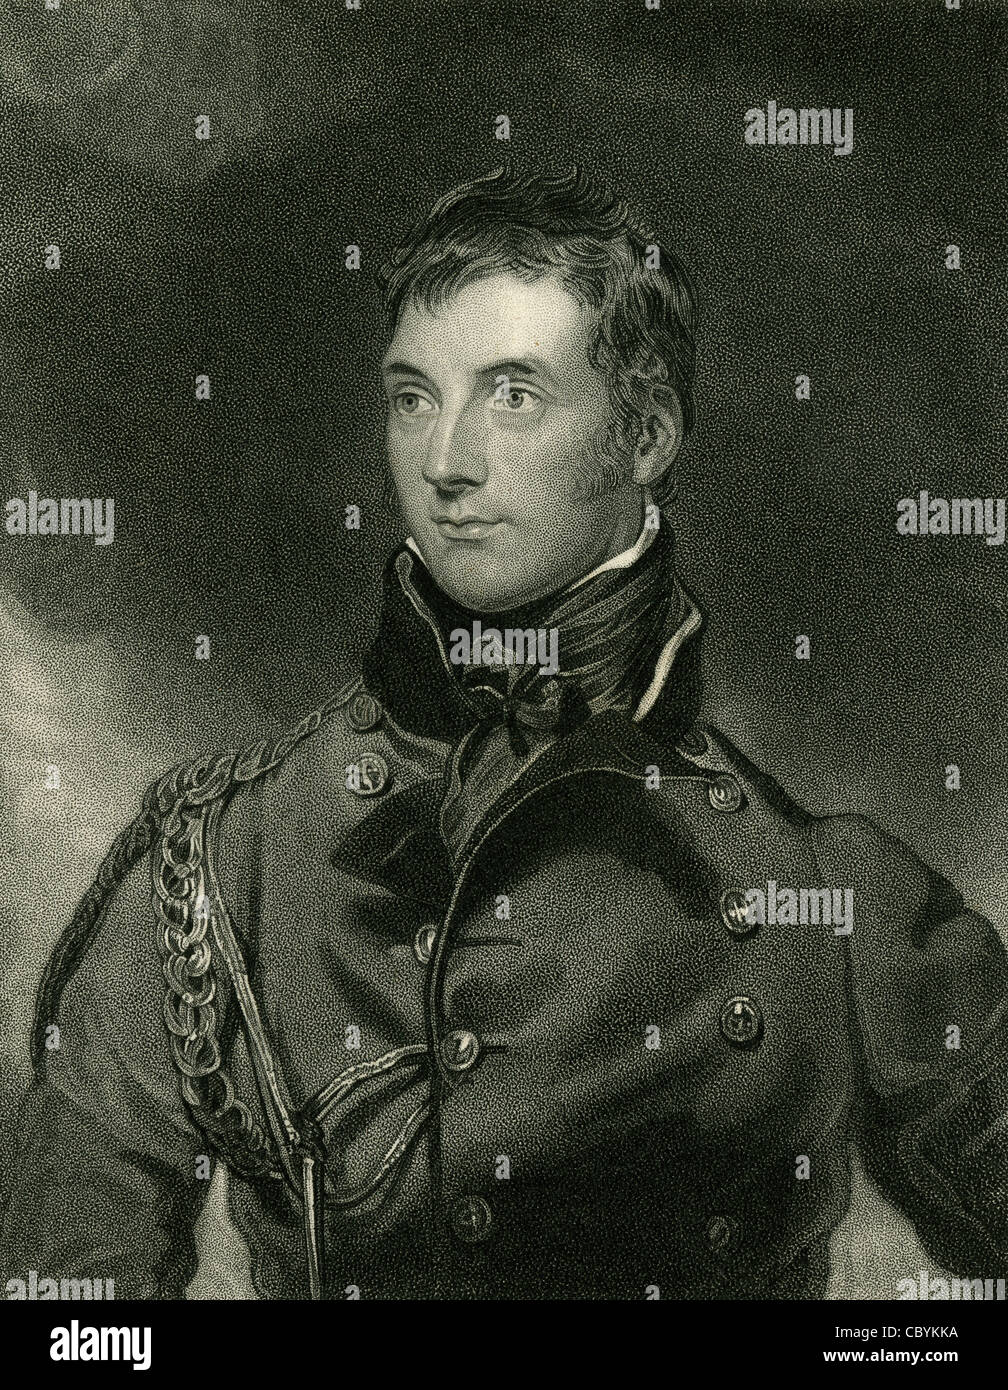 1830 engraving. Sir George Murray, GCB, GCH, FRS (6 February 1772 – 28 July 1846) was a Scottish soldier and politician. Stock Photo